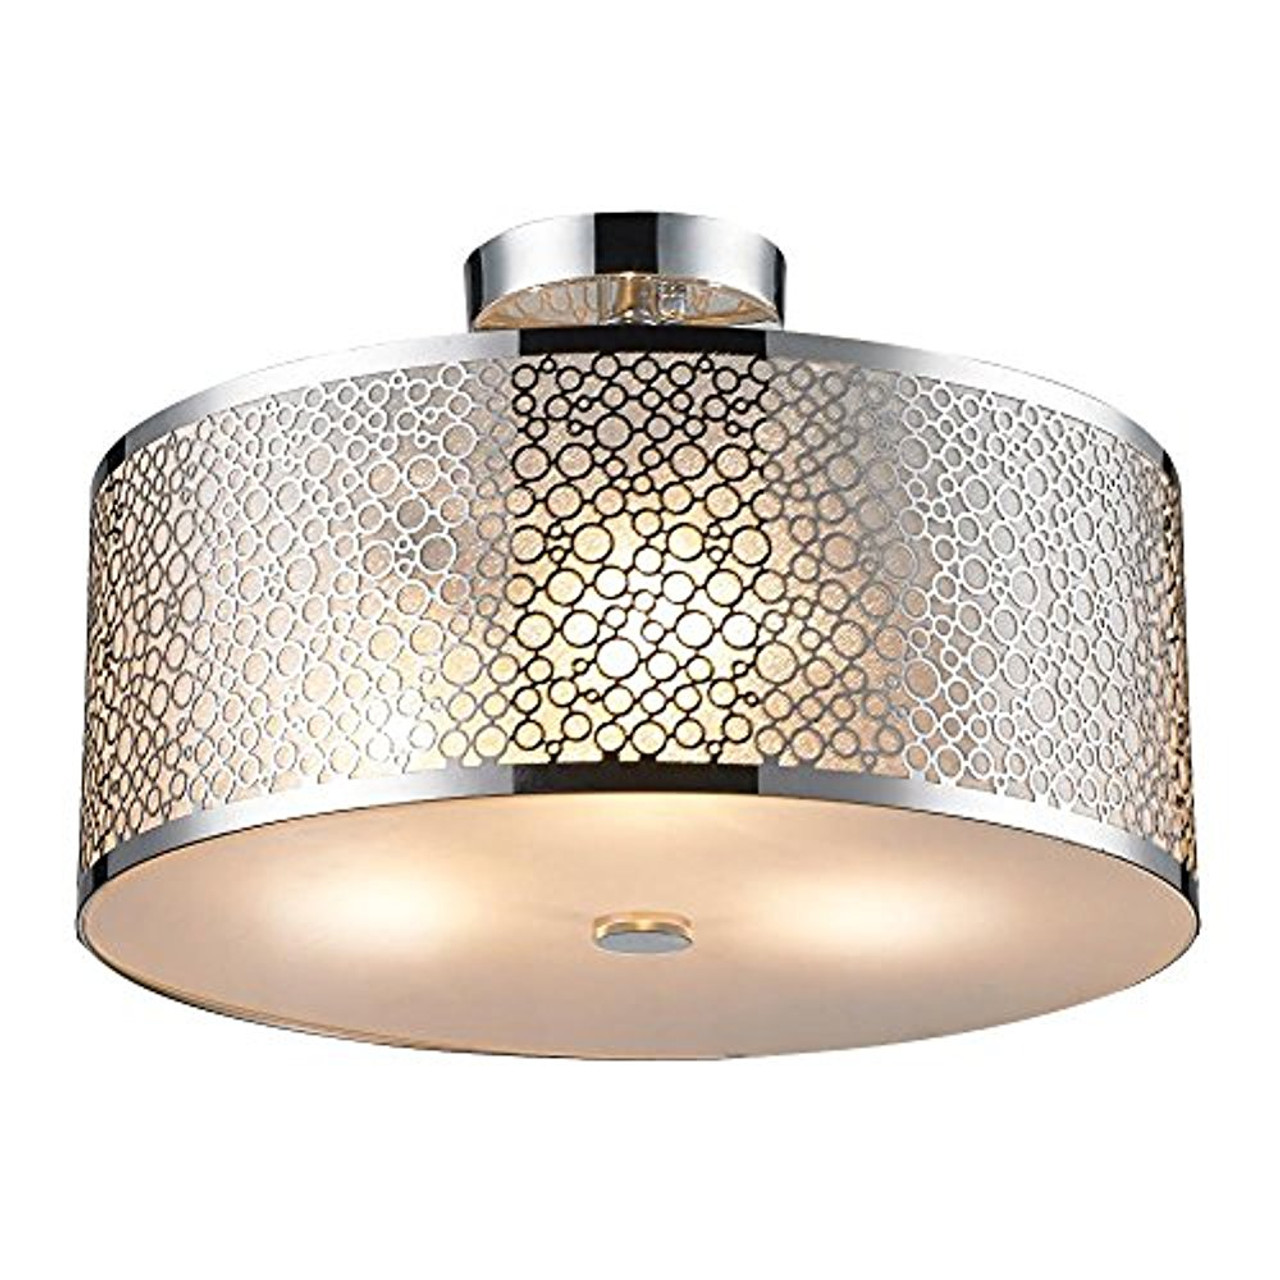 Serenelife Home Lighting Fixture Semi Flush Mount Ceiling Accent Light With 15 8 X 6 3 Dome Shaped Sculpted Metal Lamp Shade And Etl Rated